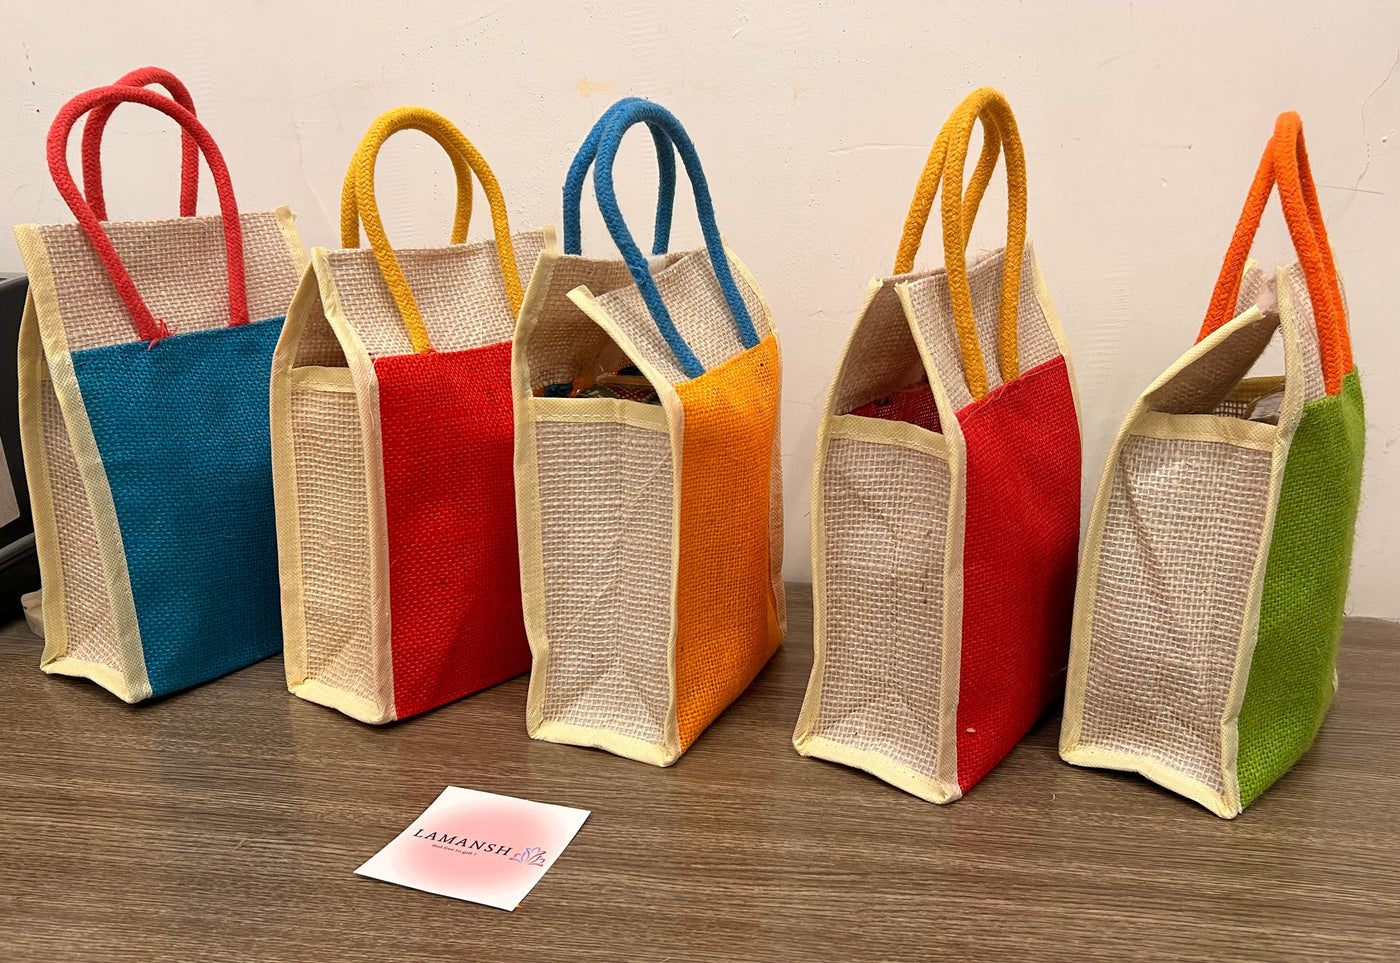 45 Rs each on buying 🏷in bulk | Call 📞 at 8619550223 jute gift bags LAMANSH Plain 10*7*3.5 inch Jute bags for packing wedding favors 🎁 giveaways and return gifts